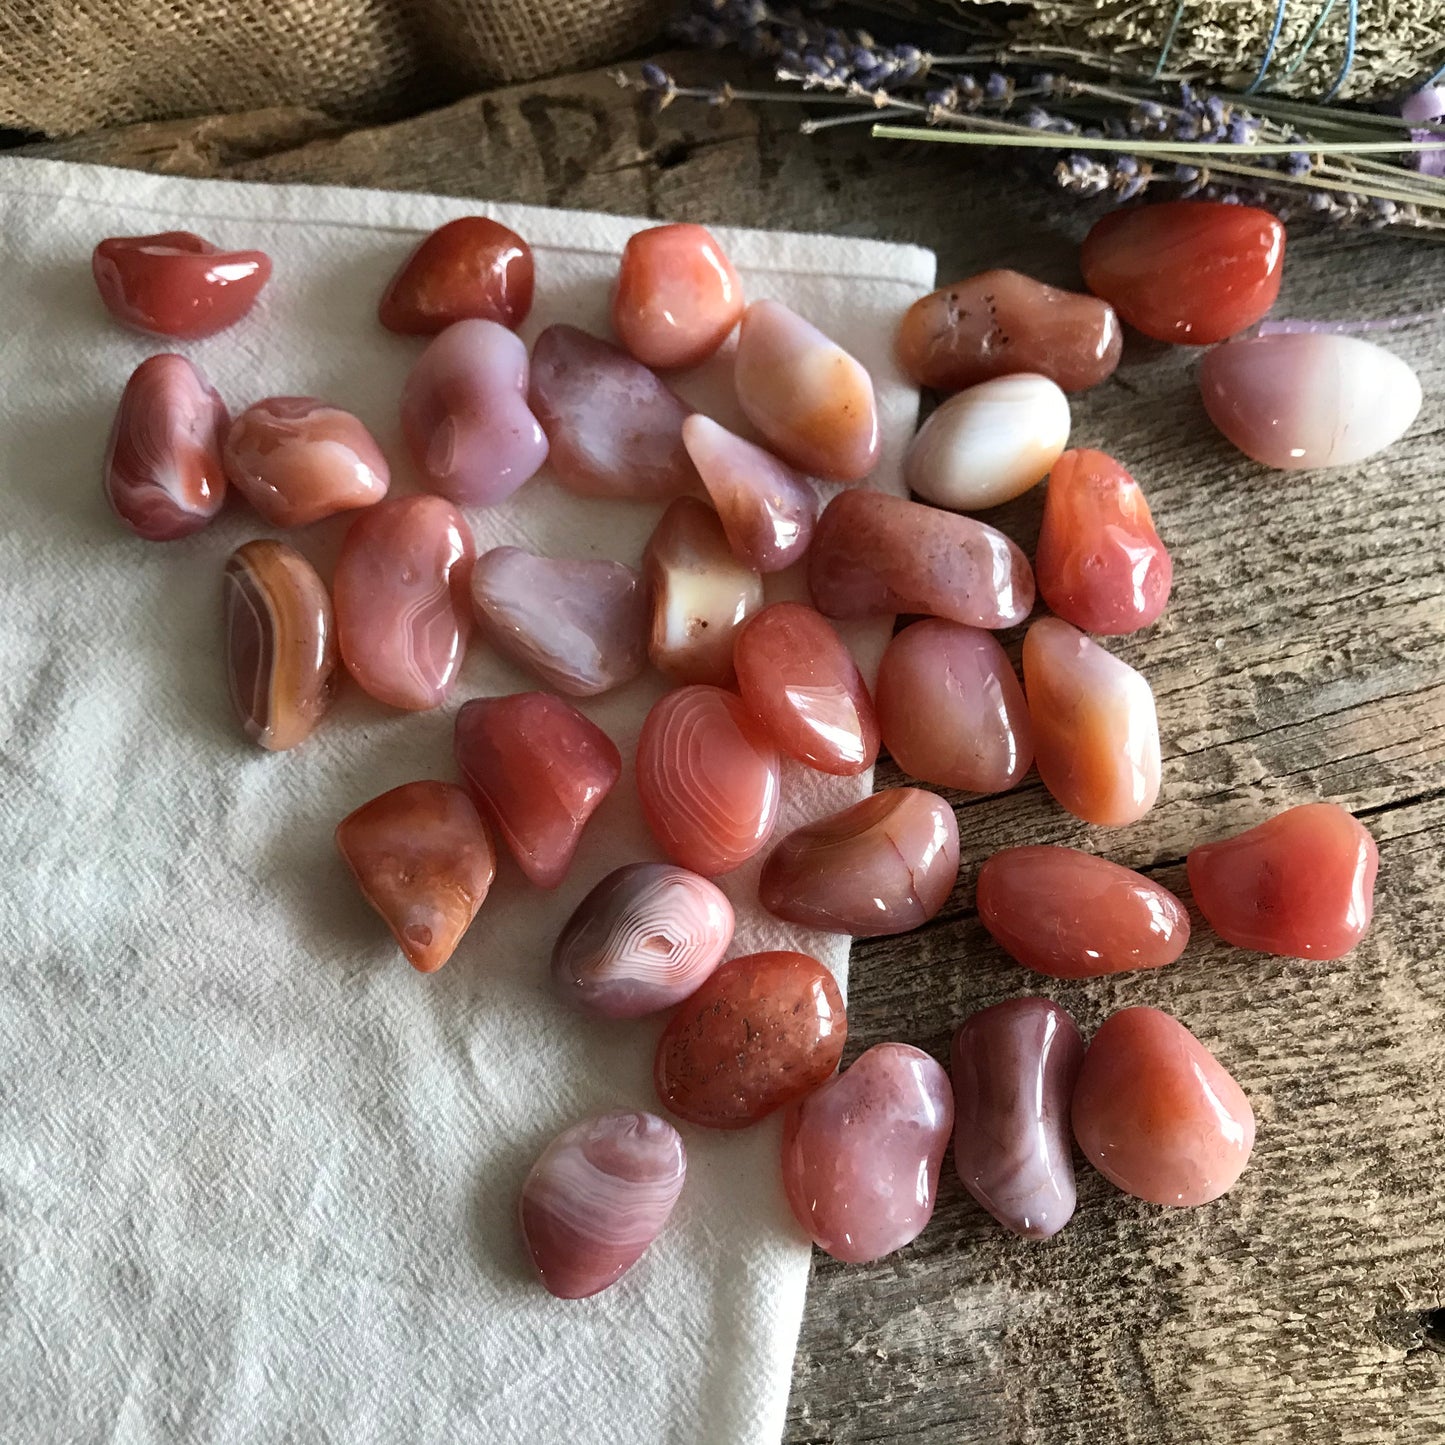 Peach Botzwana Agate Tumbled Polished (Approx. 3/4" - 1") Polished Stone for Crystal Grid, Wire Wrapping or Craft Supply BIN-1346